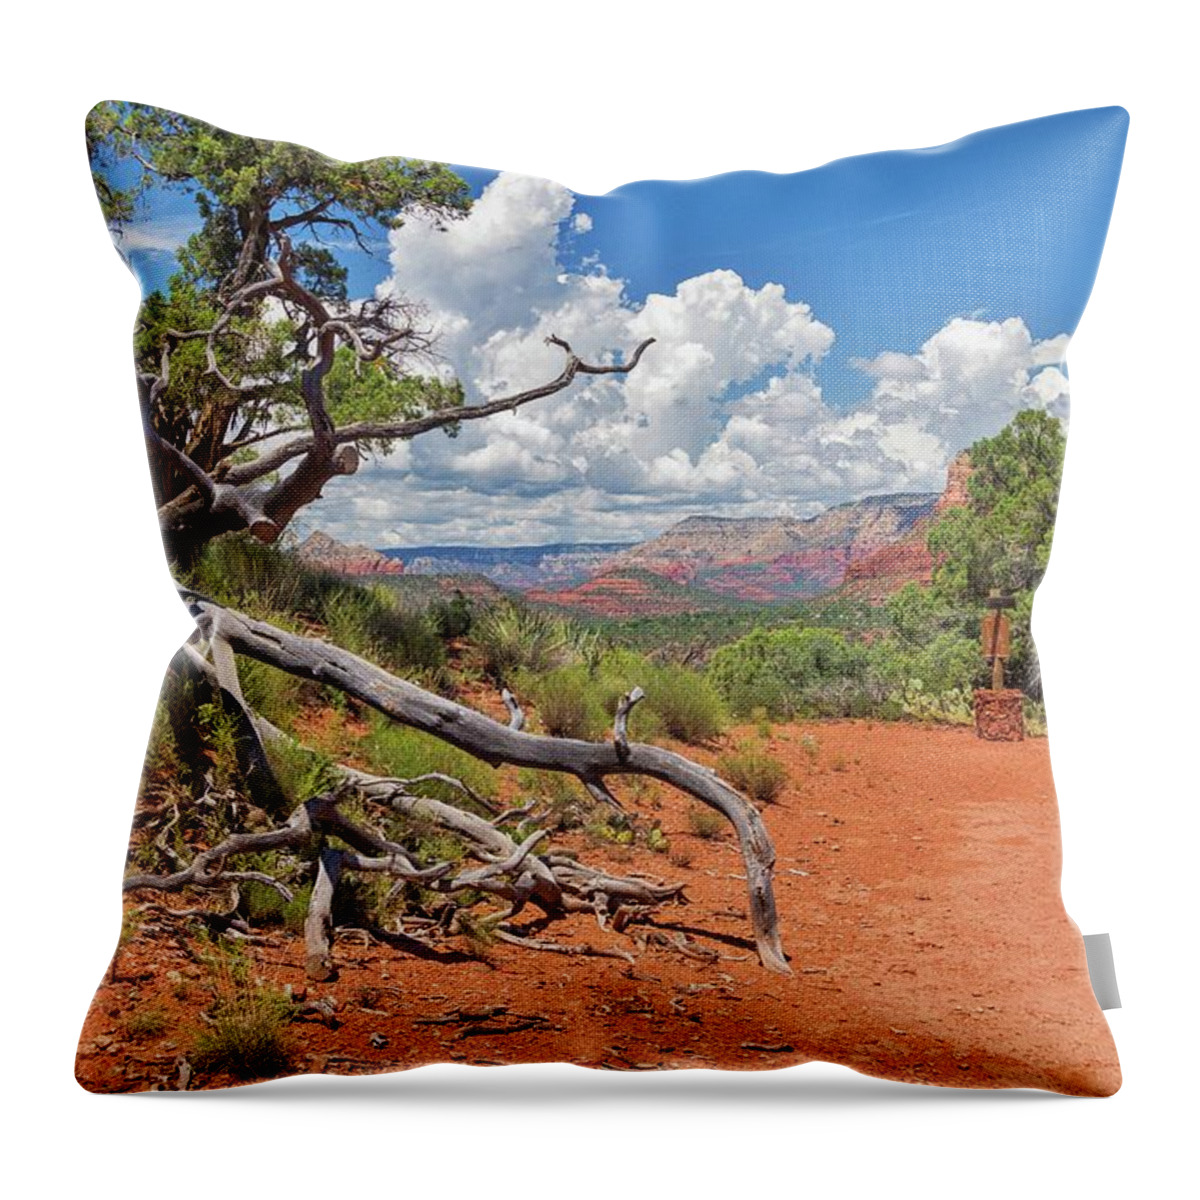 Arizona Throw Pillow featuring the photograph Courthouse Butte Loop Trail View by Marisa Geraghty Photography